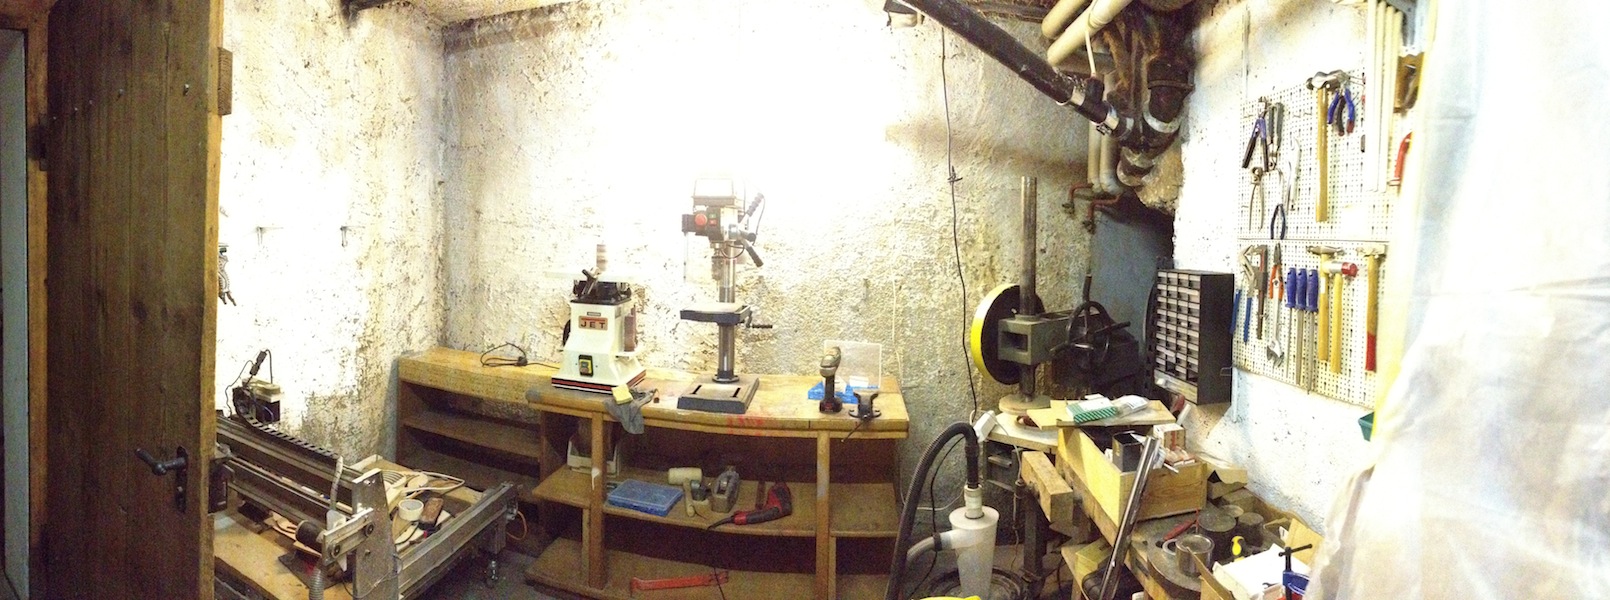 panoramic view of the workshop